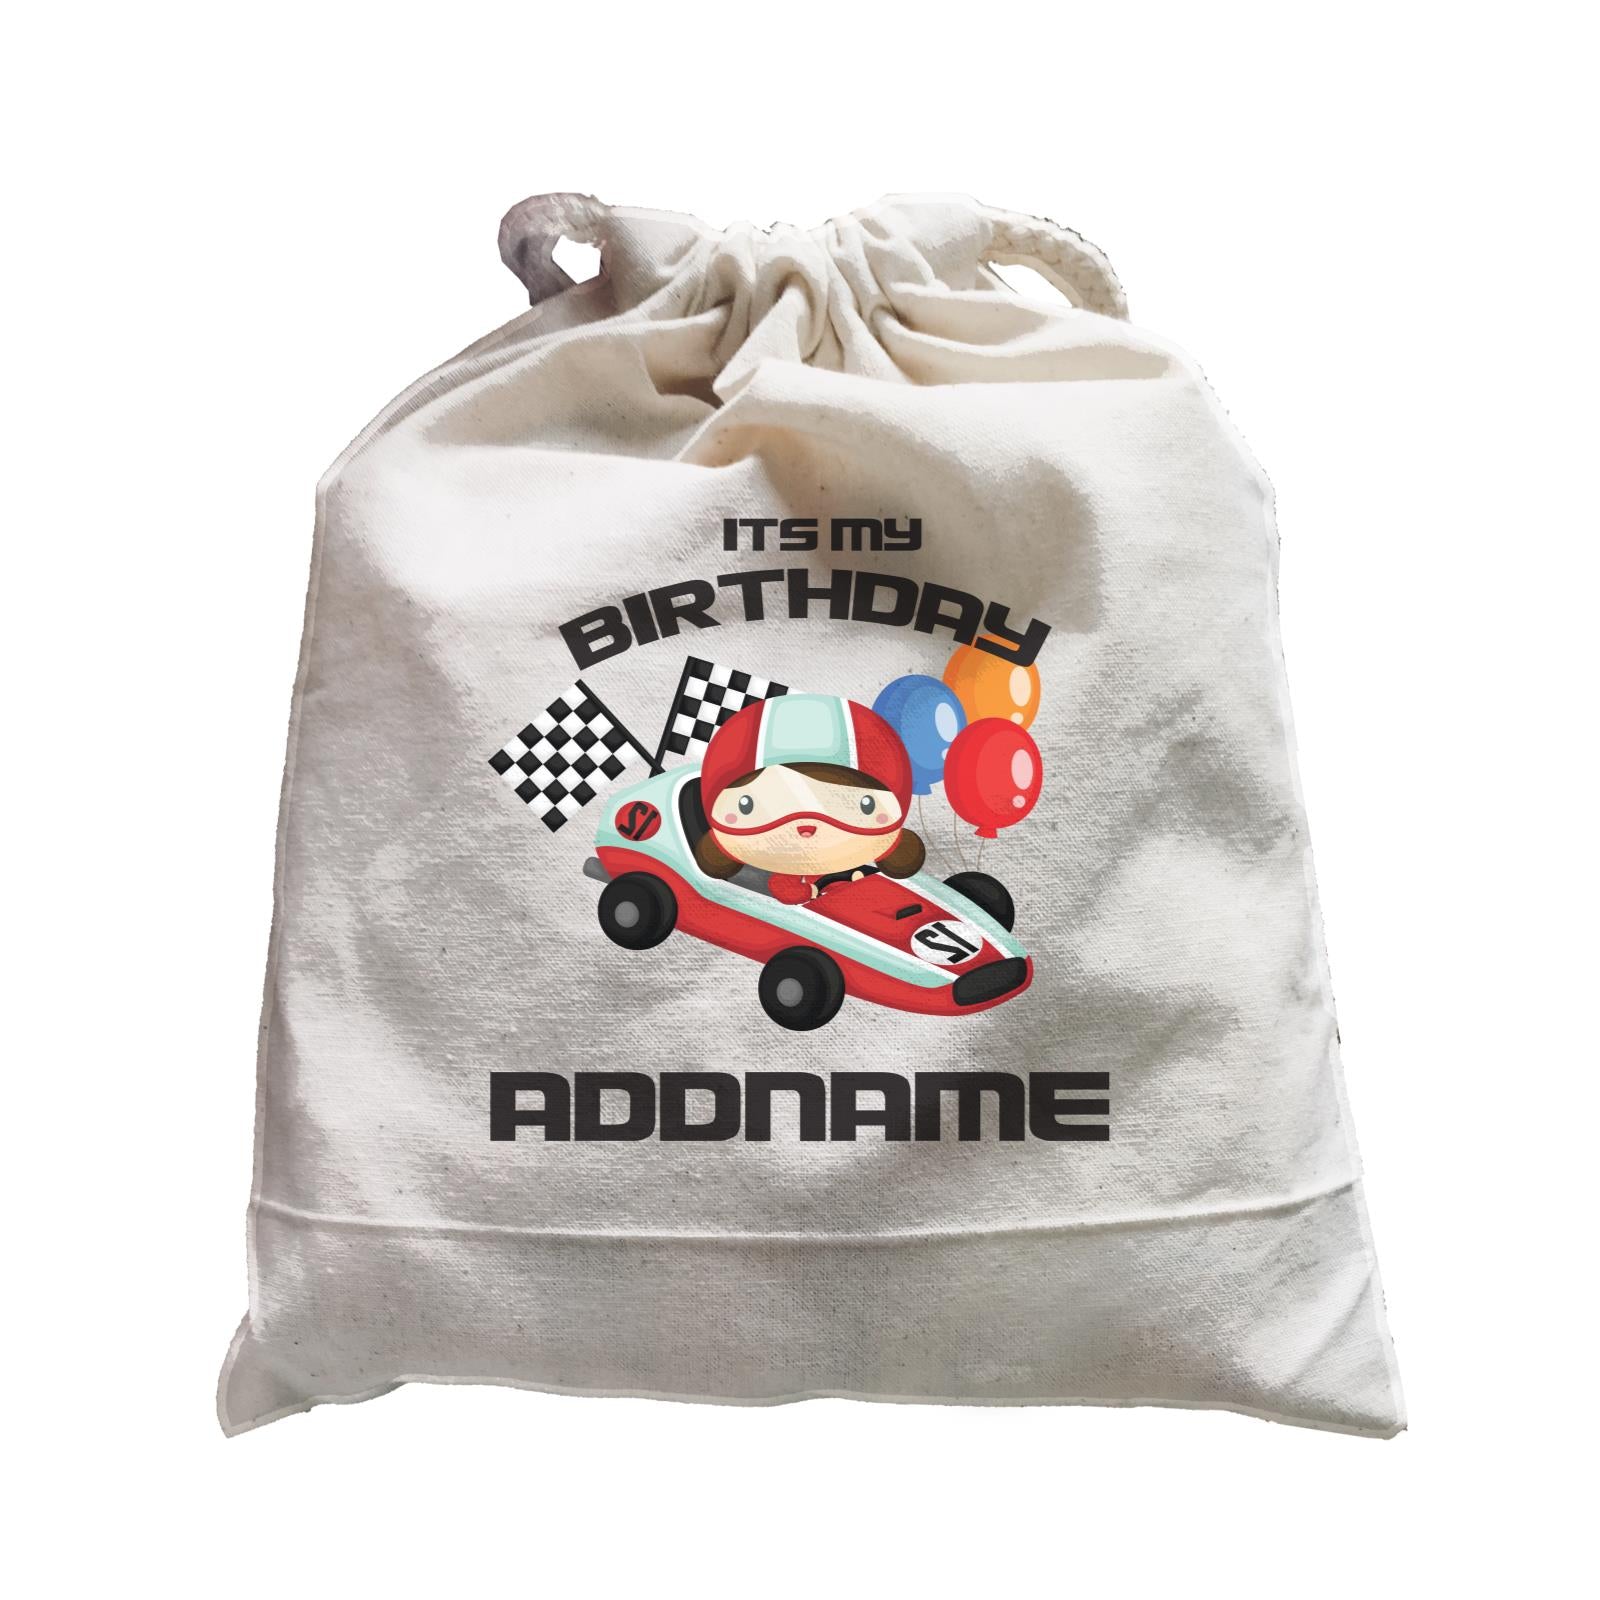 Birthday Cars Race Racer Girl With Racing Cars Its My Birthday Addname Satchel